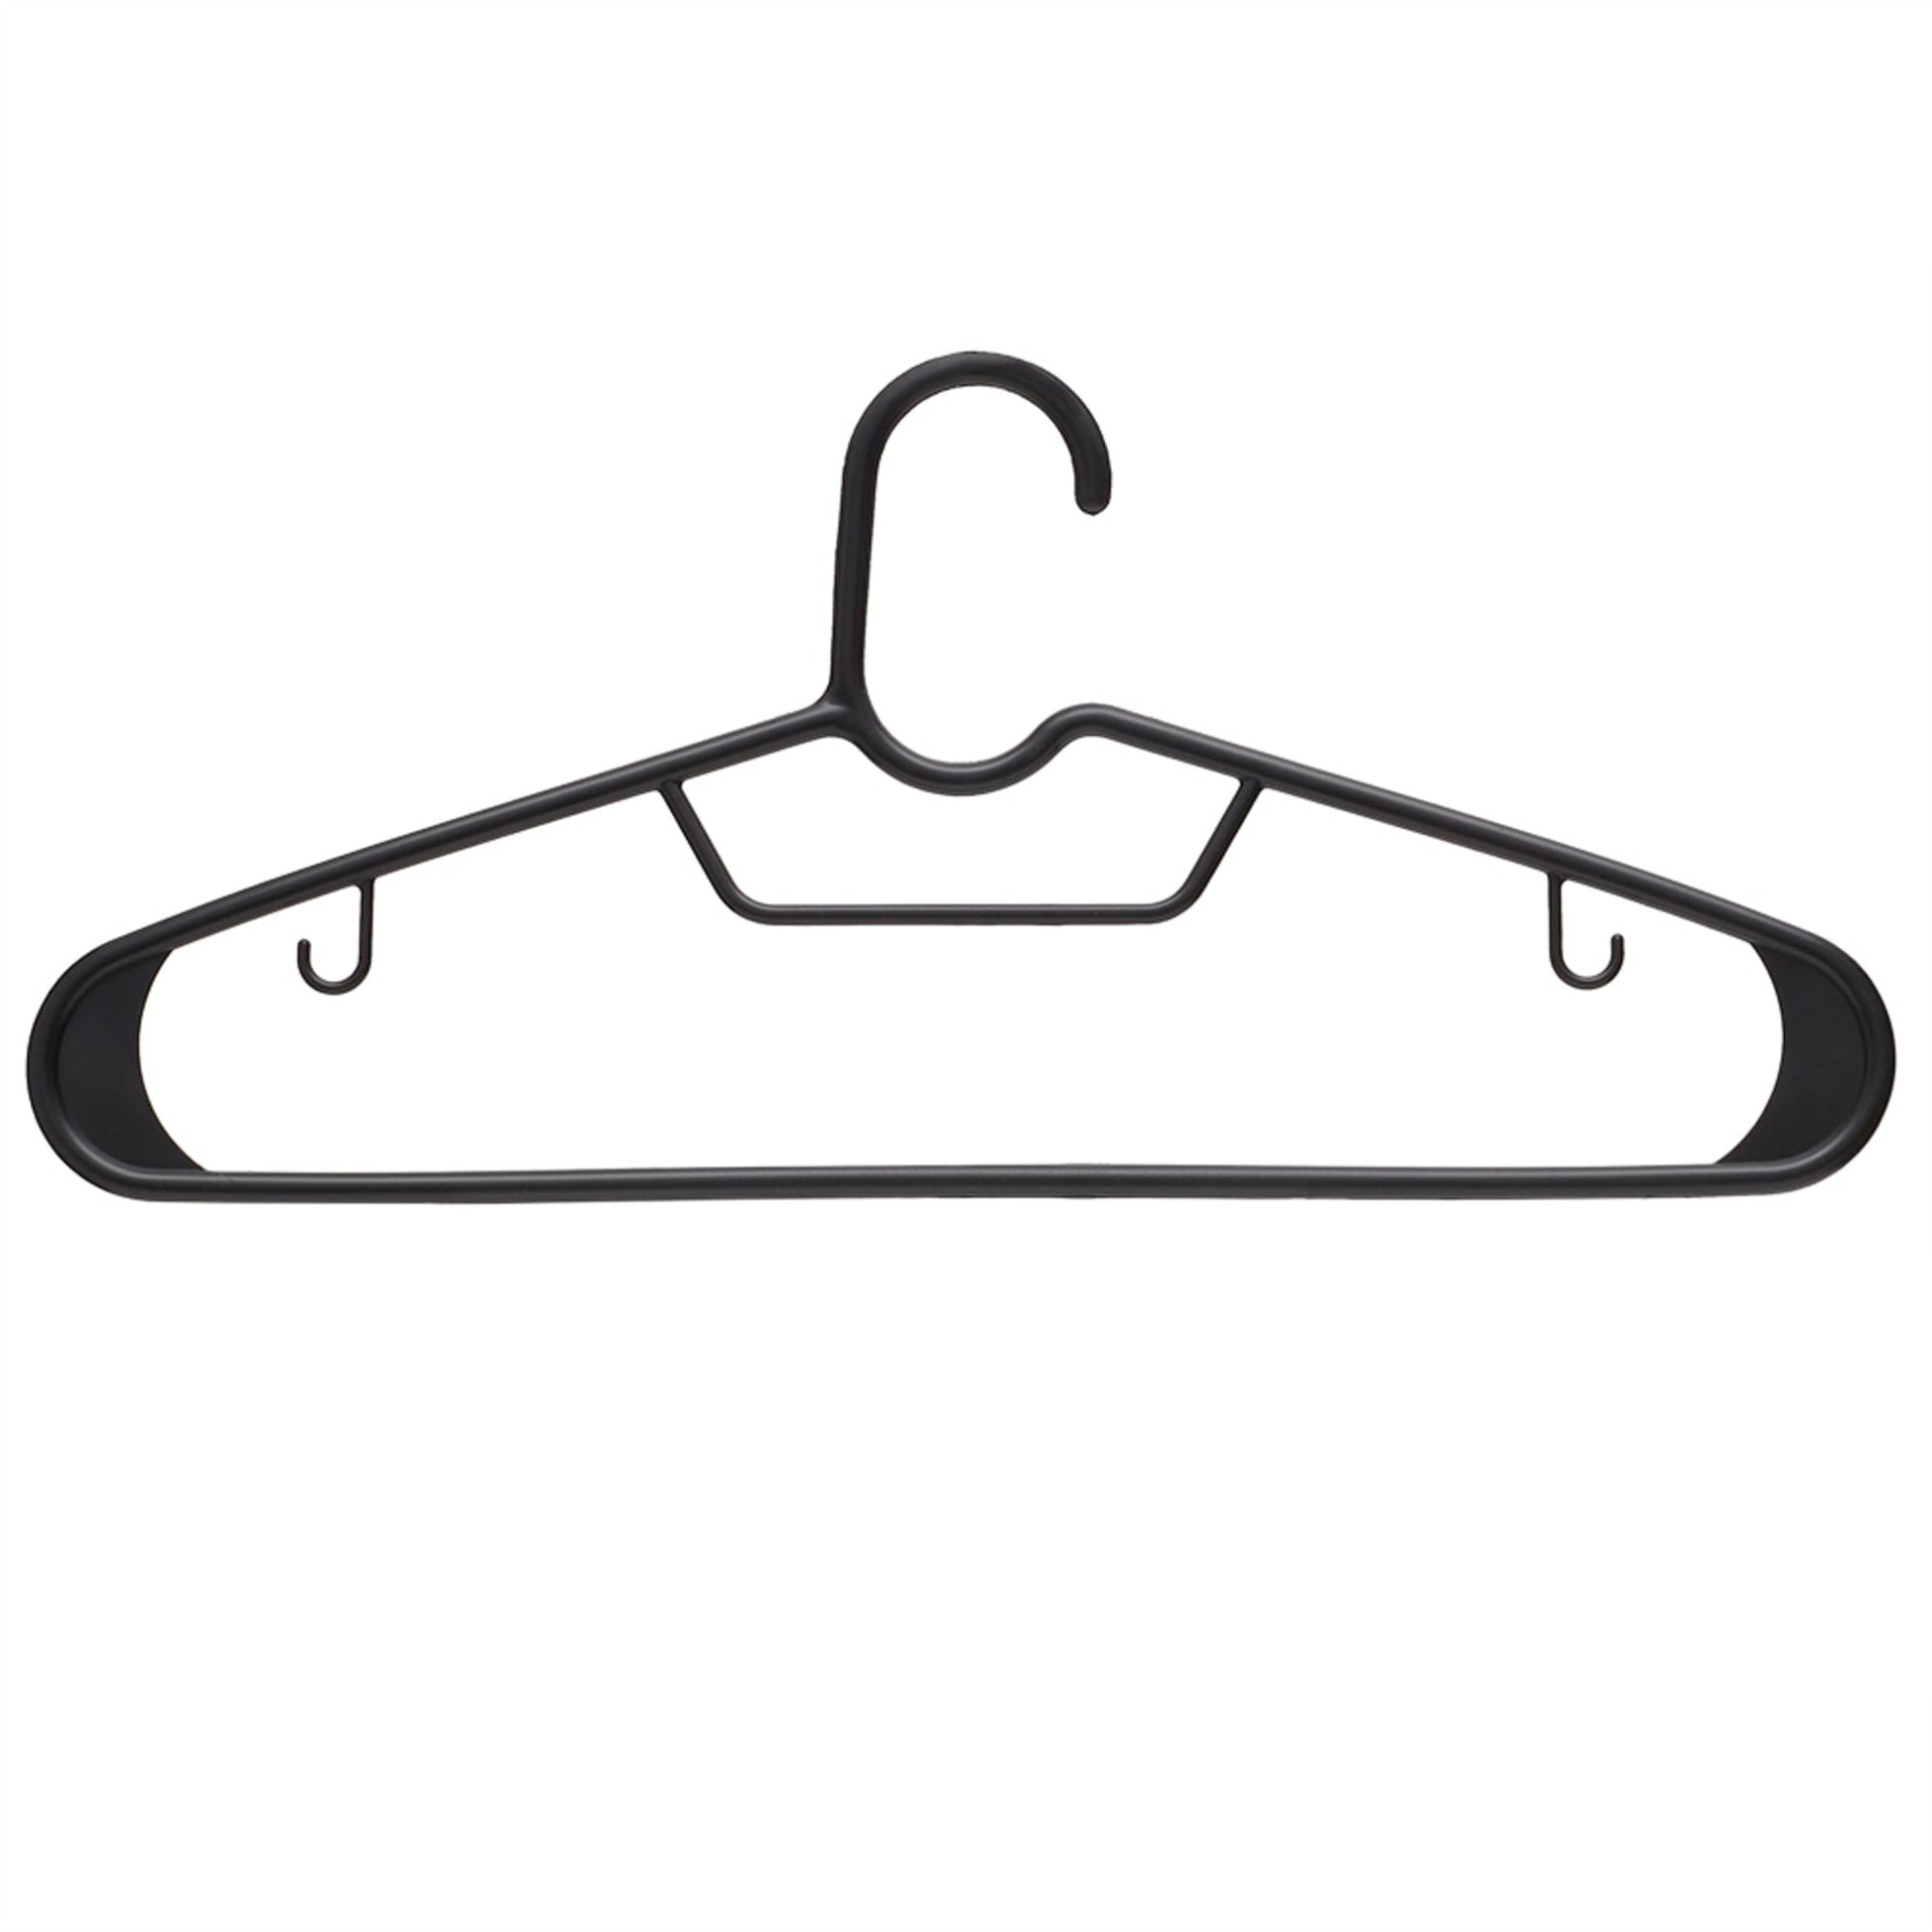 Coolmade Plastic Hangers Clothing Hangers Ideal for Everyday Standard Use  (Black, 20 Pack) 